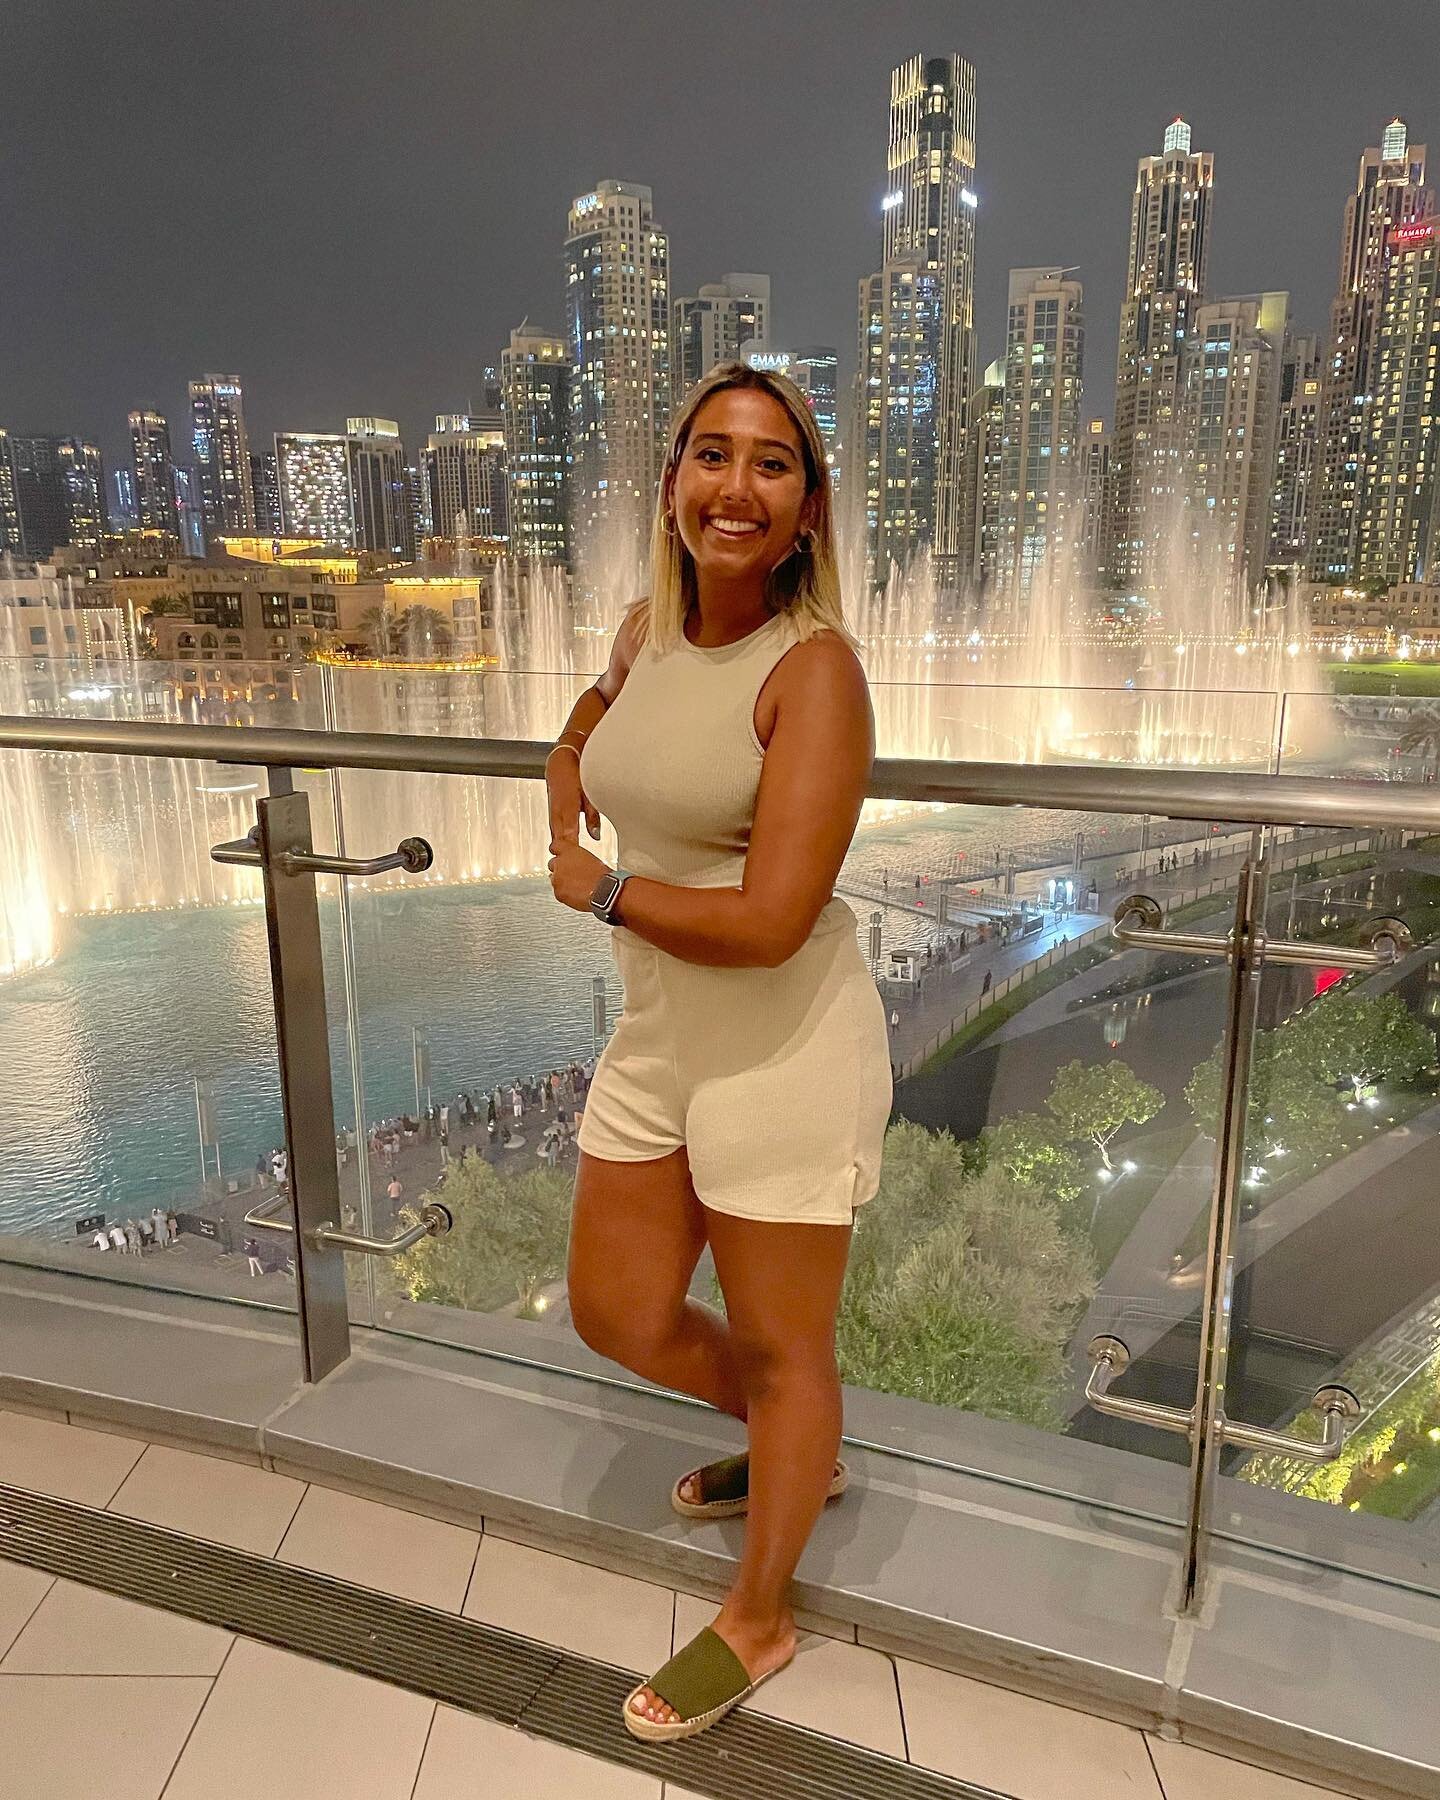 .
Wow can&rsquo;t believe I&rsquo;m saying this but I&rsquo;m actually looking forward to getting cosy this winter and ready for the cold weather! But in the meantime here&rsquo;s a pic of me in Dubai at 38 degrees 🥴 

Ahead of tomorrow night&rsquo;